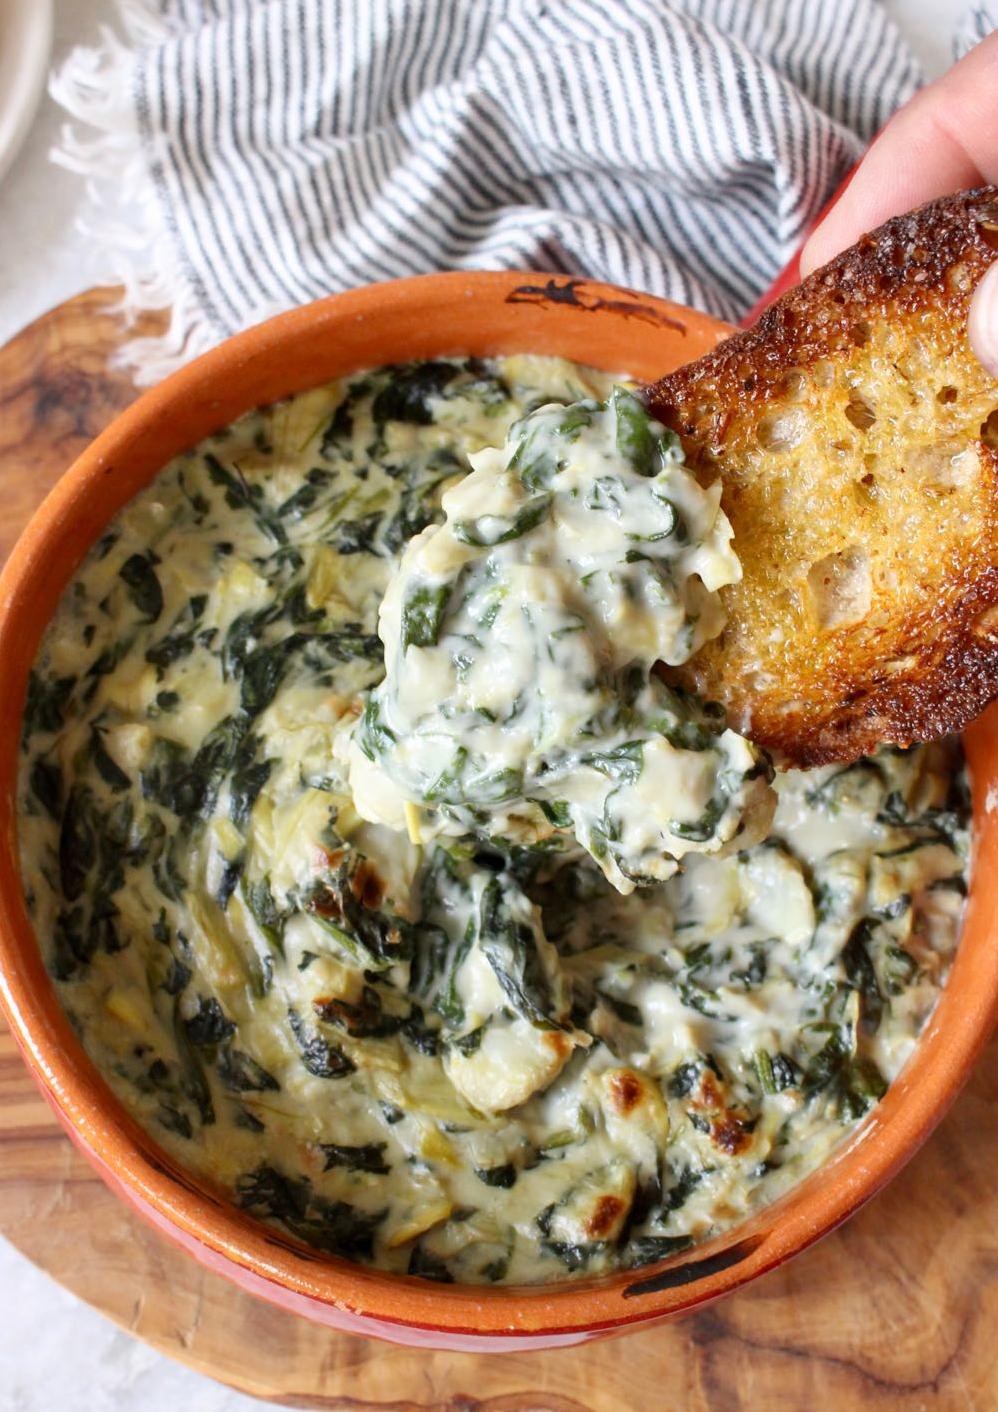  Looking for a vegan party appetizer? Look no further than this spinach tofu dip.